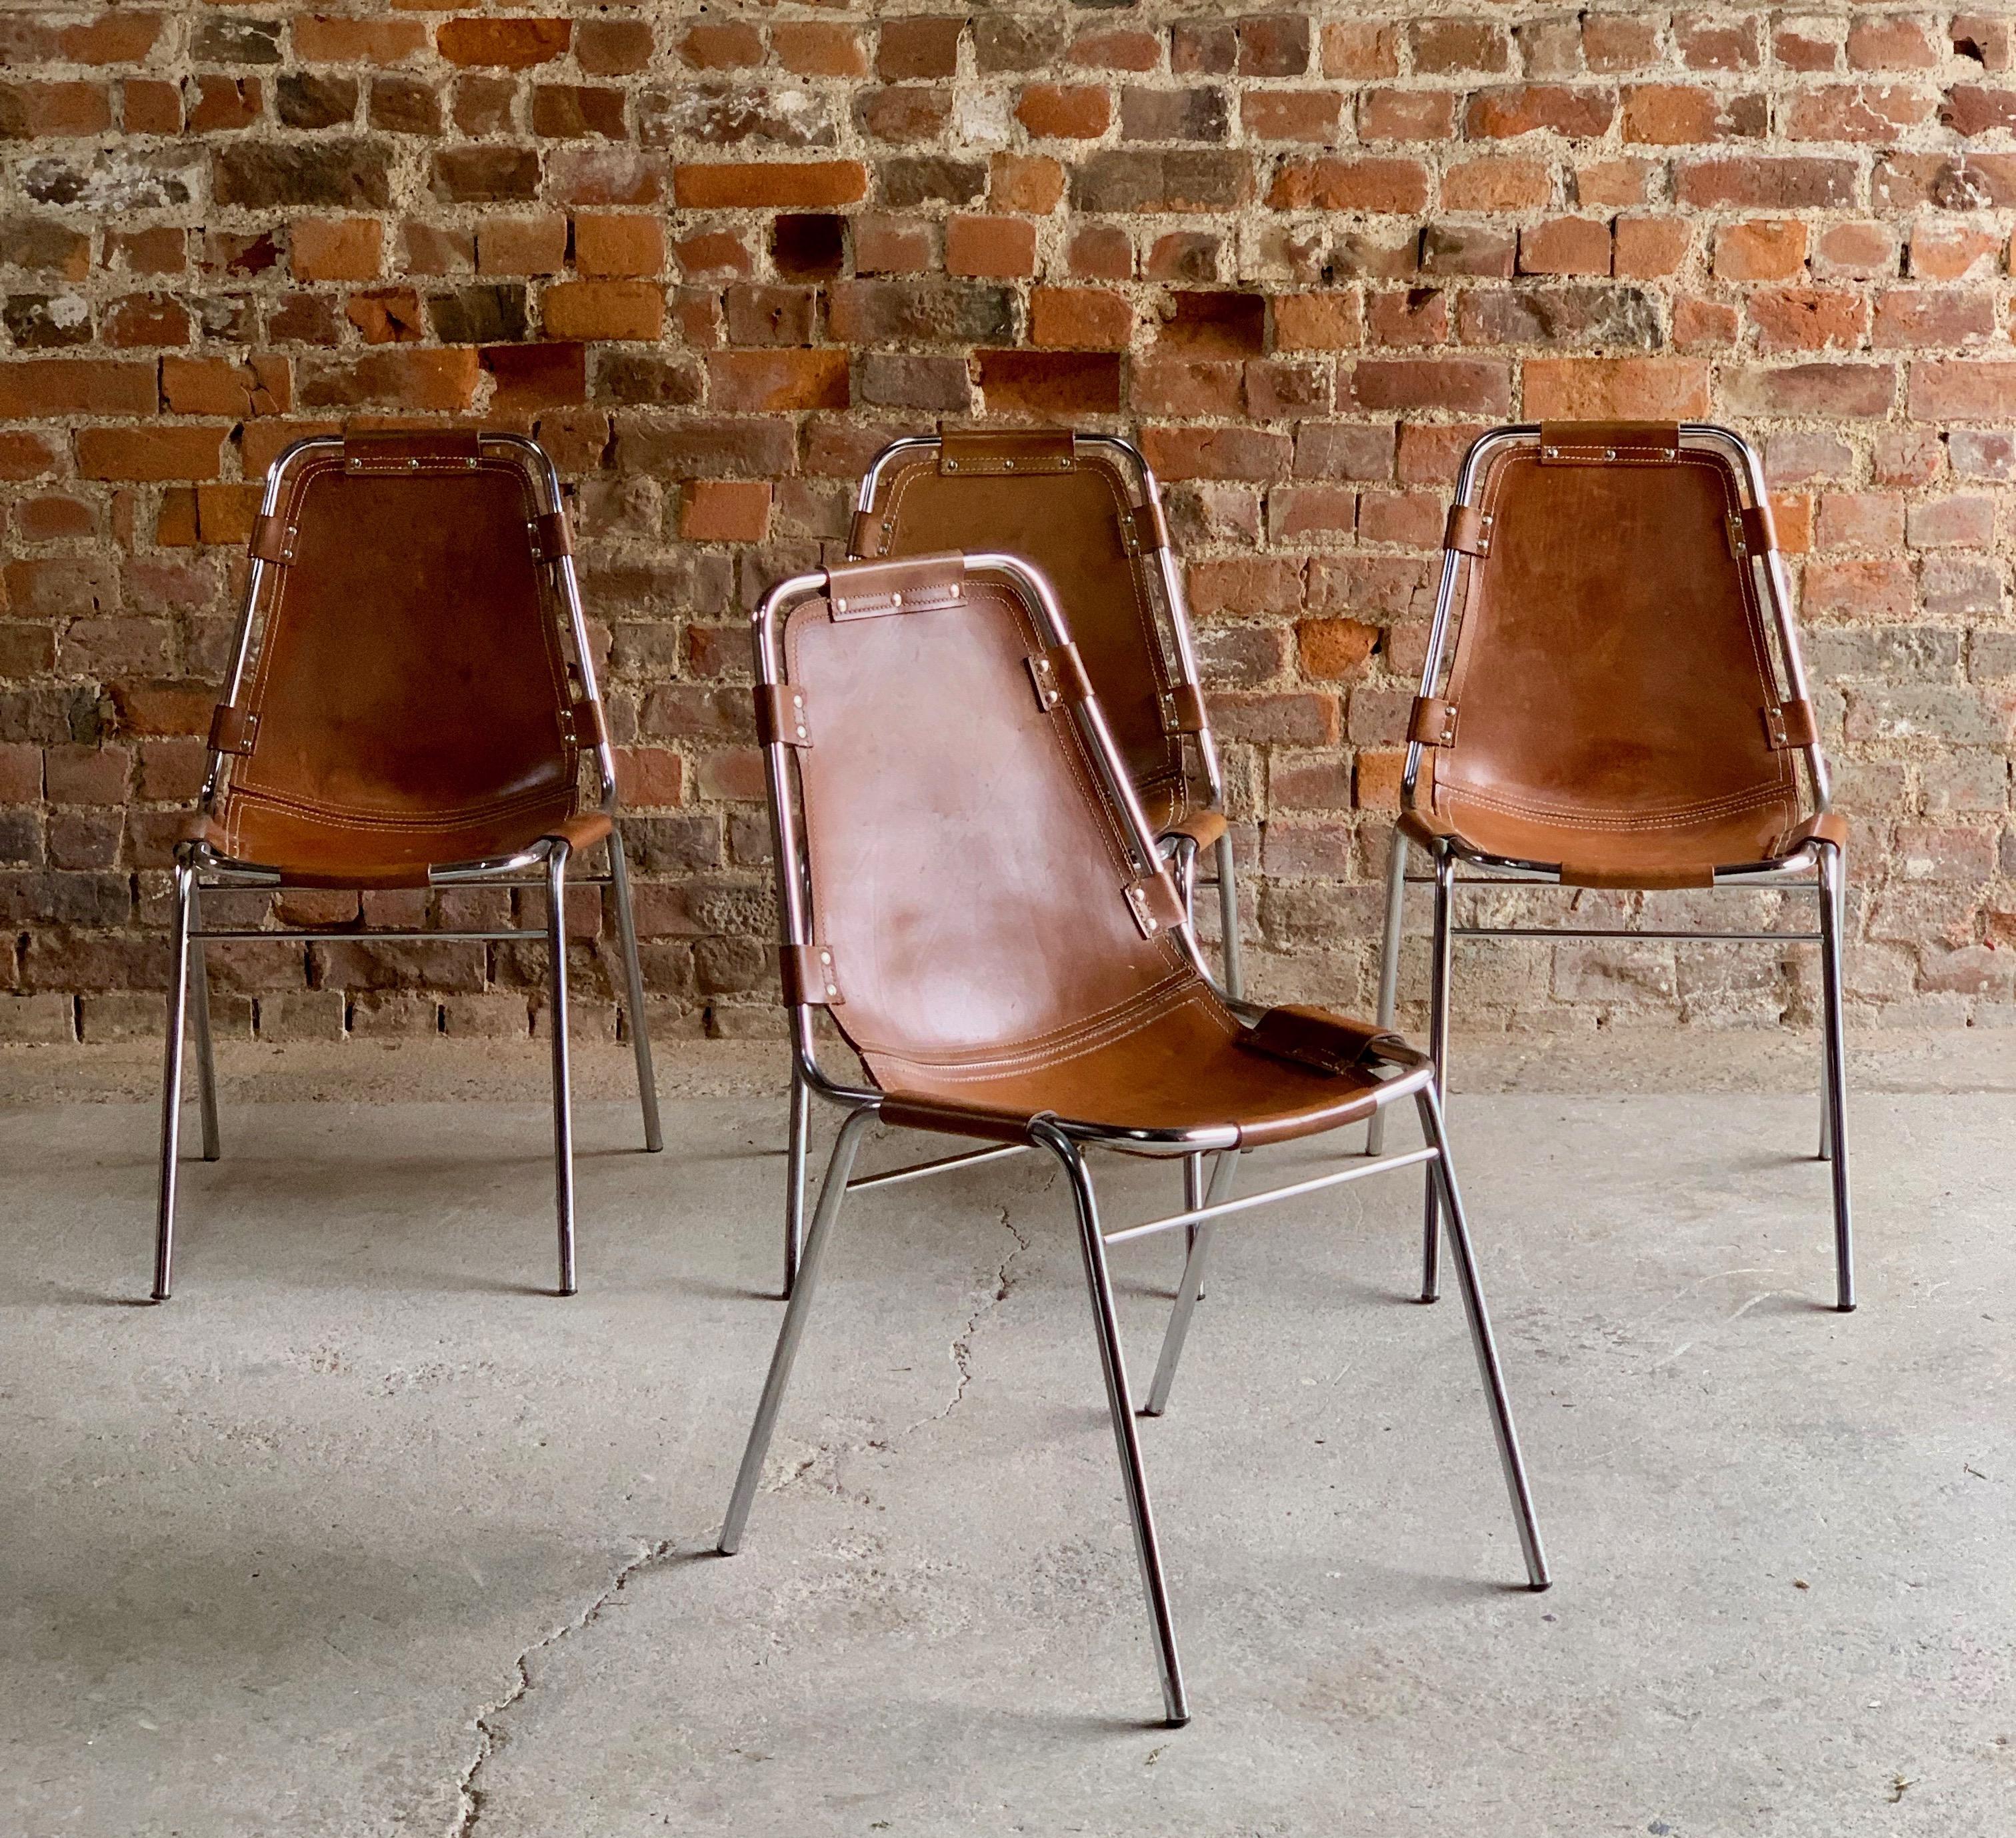 Charlotte Perriand dining chairs leather four Les Arcs 1970s original.

Fabulous set of four tan leather 'Les Arcs' dining chairs designed by Charlotte Perriand for Cassina in the 1960s for the Les Arcs ski resort, each chair consists of a chrome